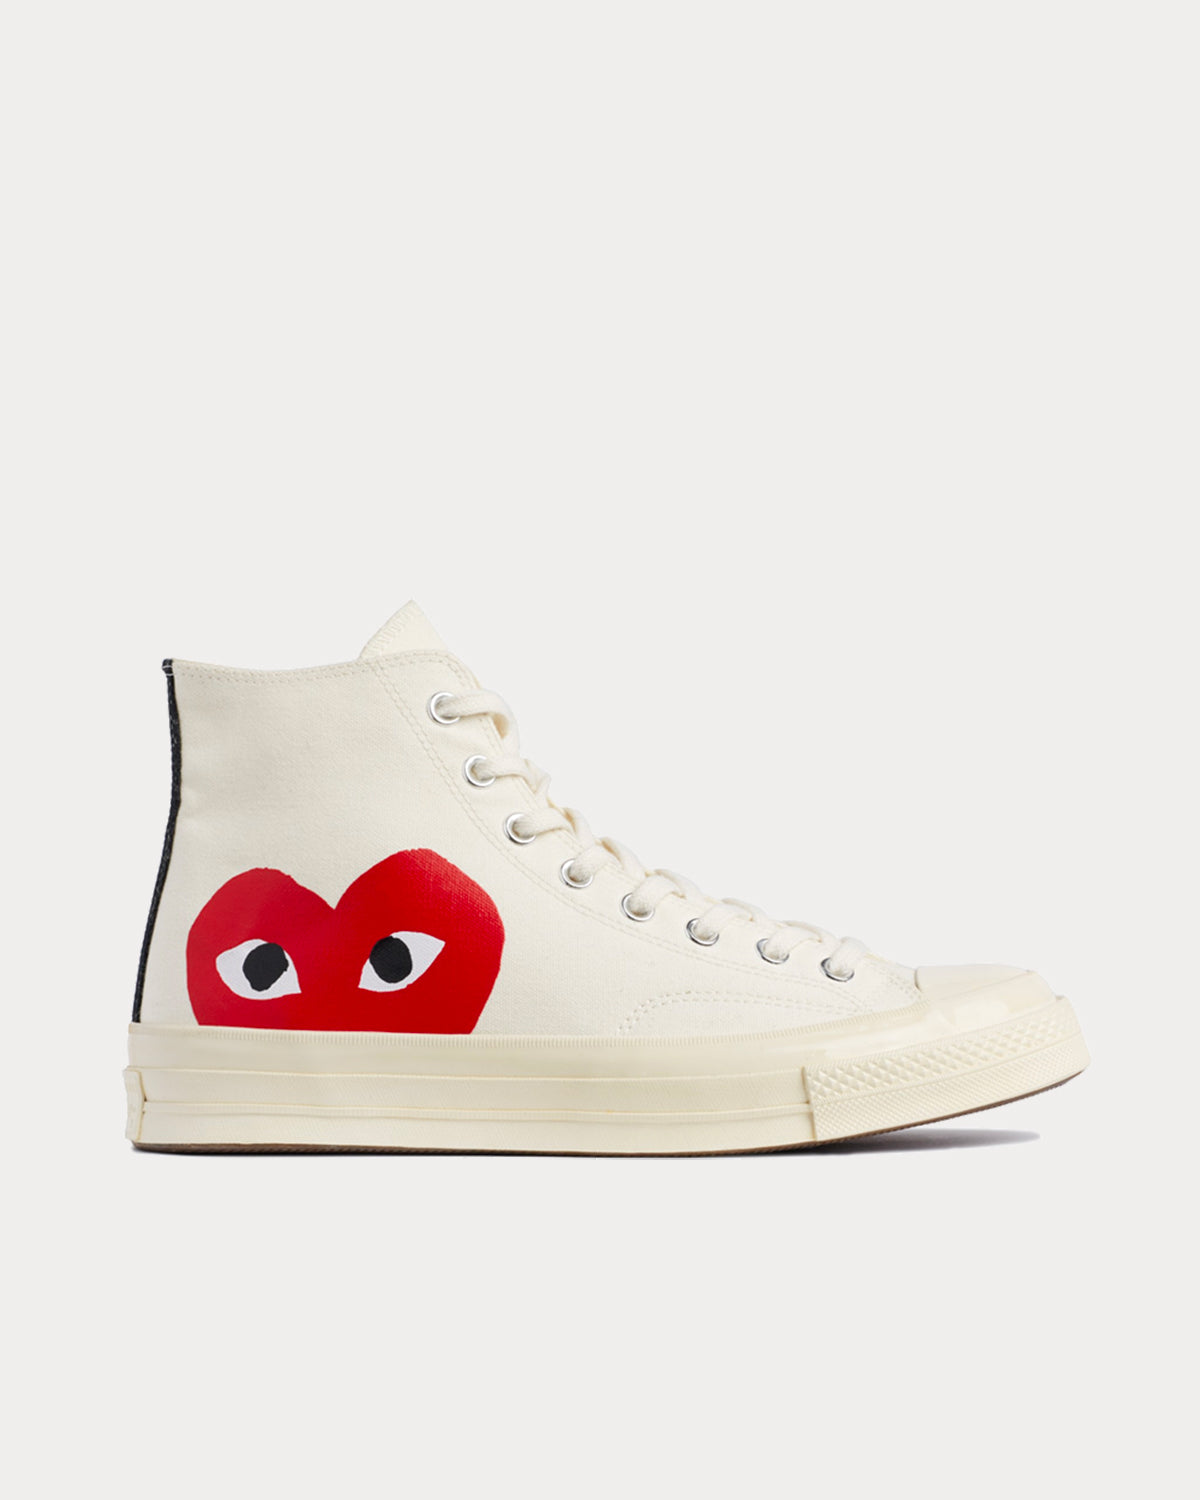 Converse x Comme des Garçons PLAY - Chuck Taylor All Star 70 Ox White High Top Sneakers